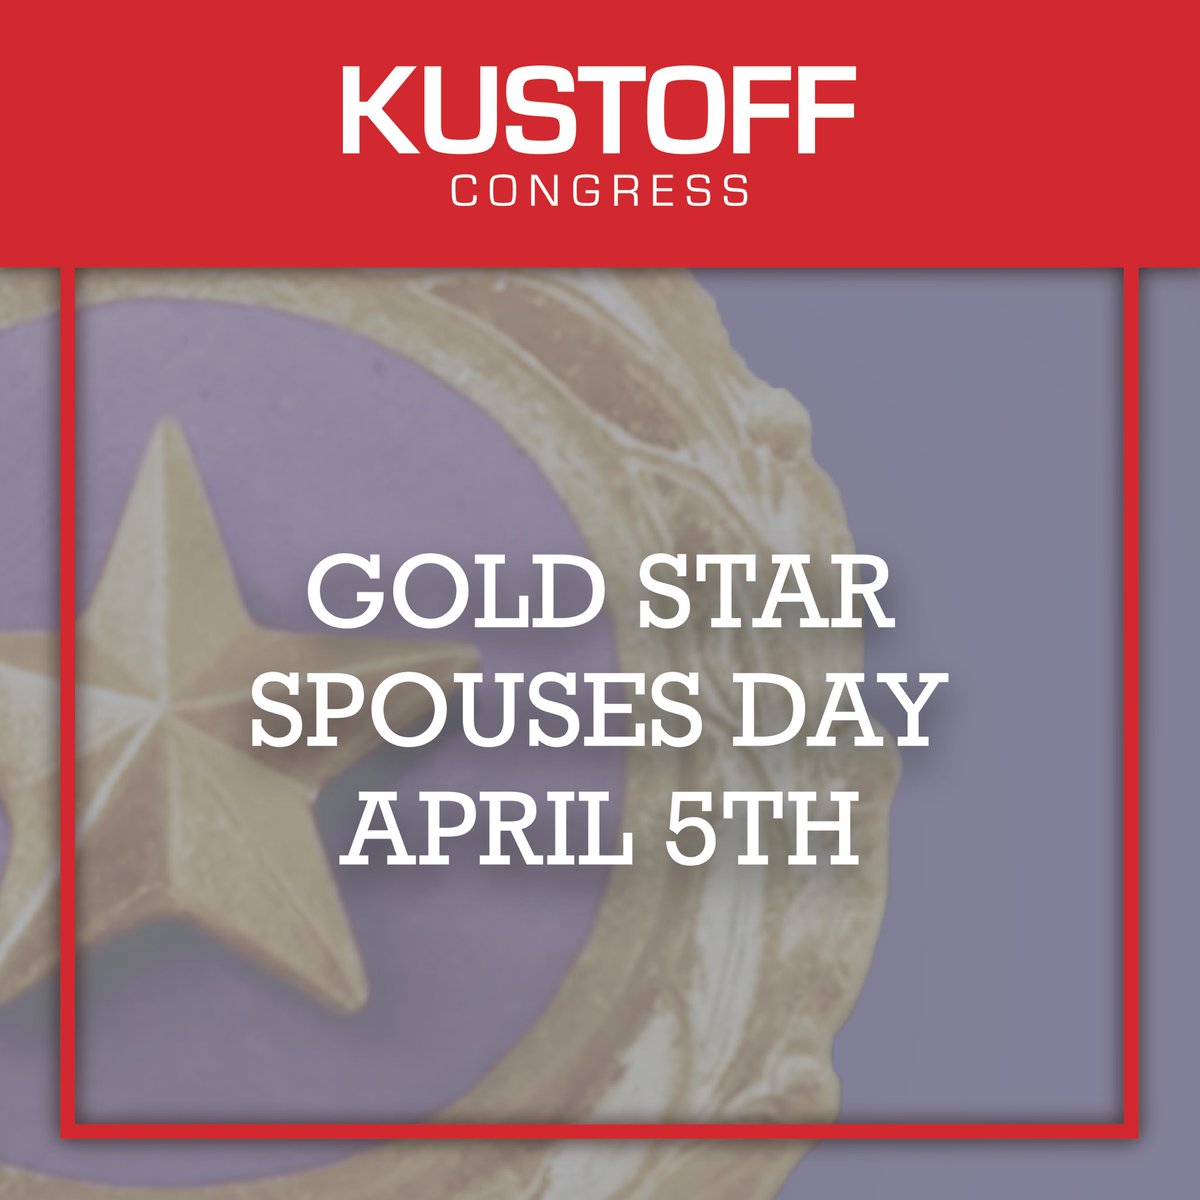 Today is Gold Star Spouses Day. We recognize the great sacrifice military spouses make, and pray for peace for those who have lost loved ones in service to our nation.